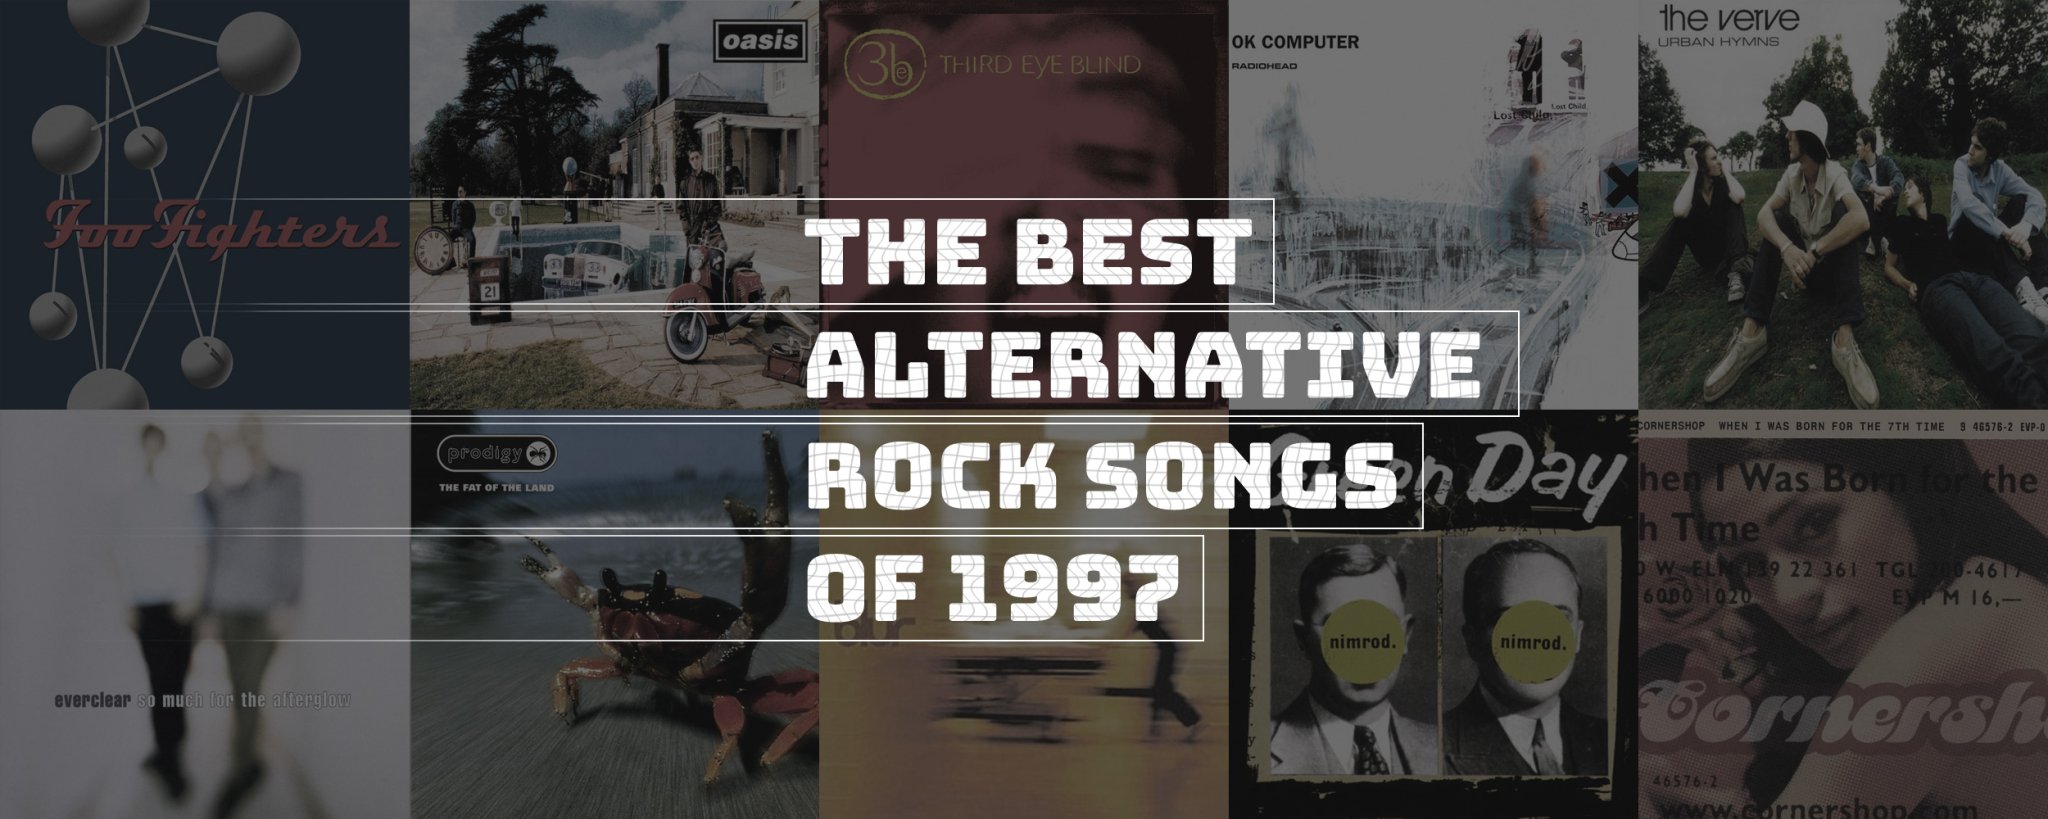 What Are Your Favorite 1997 Alternative Rock Songs?